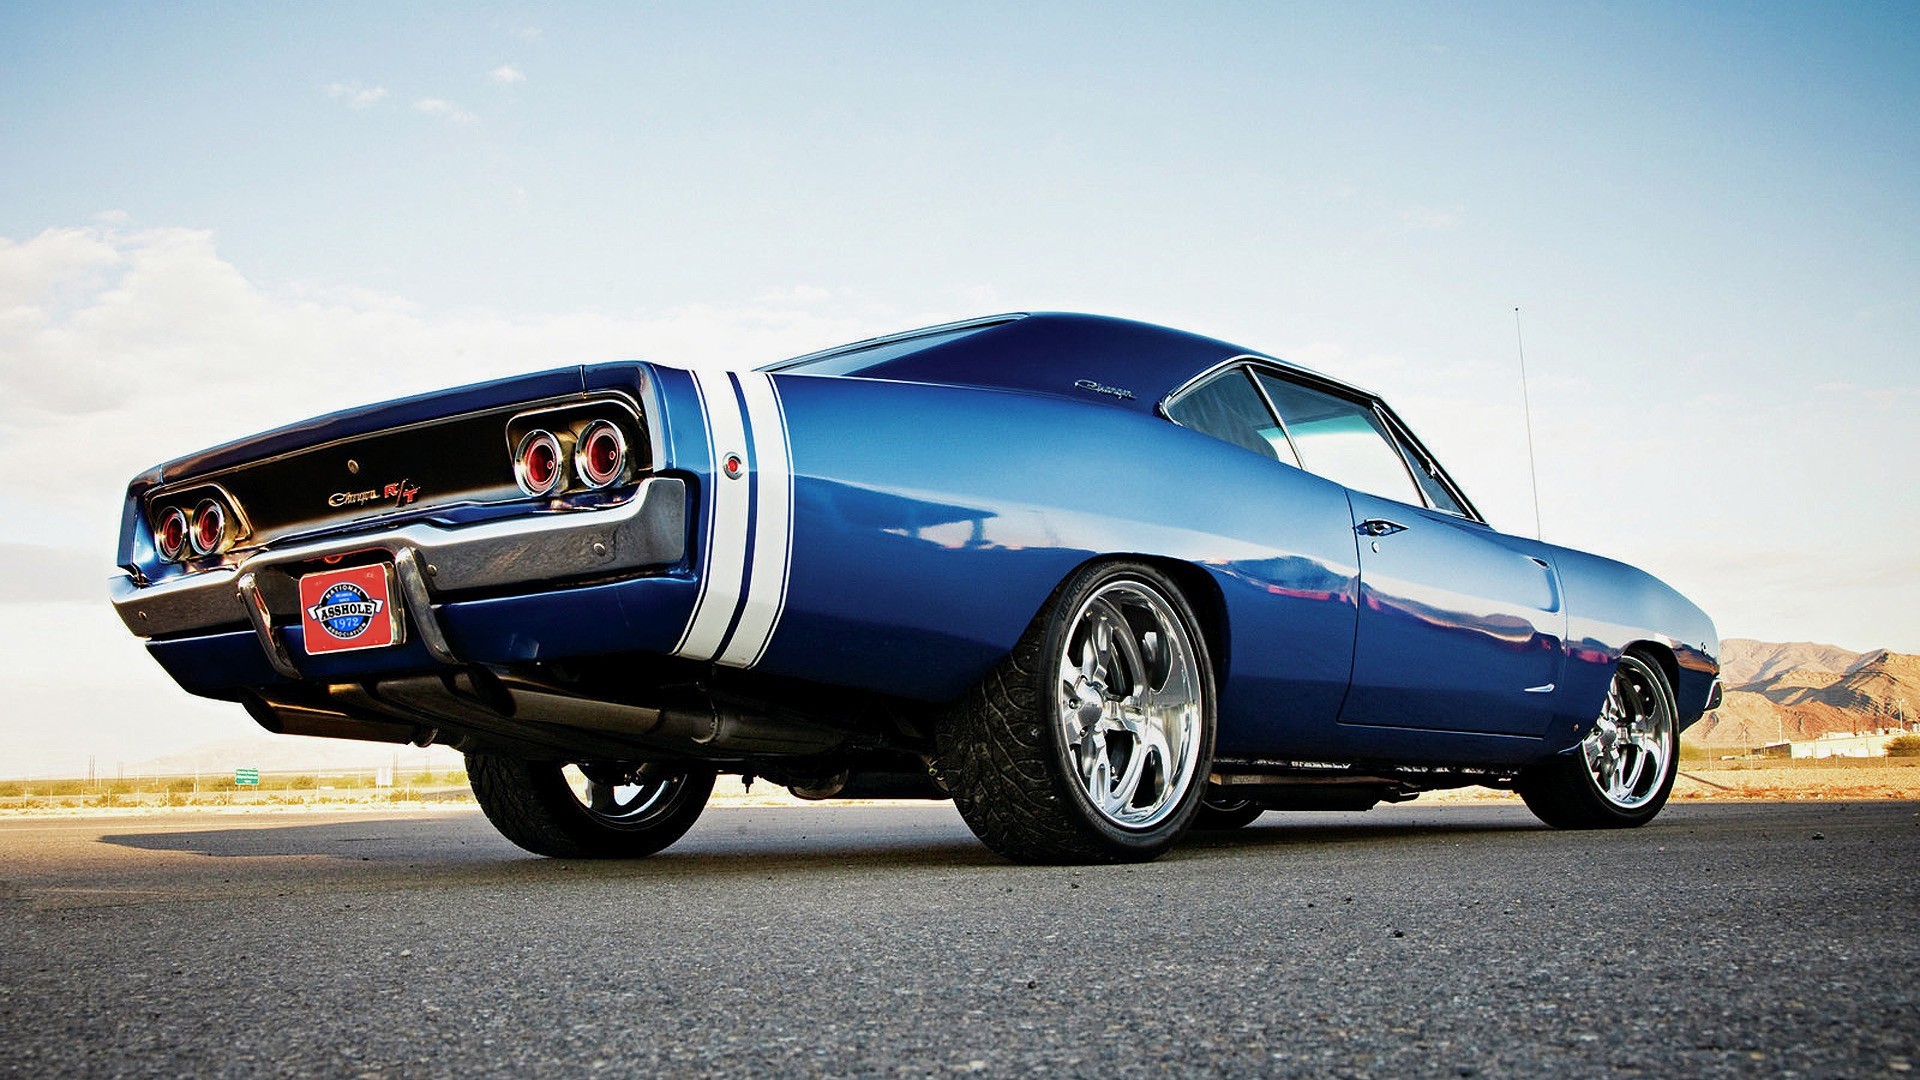 Free Download 1970 Dodge Charger Backgrounds